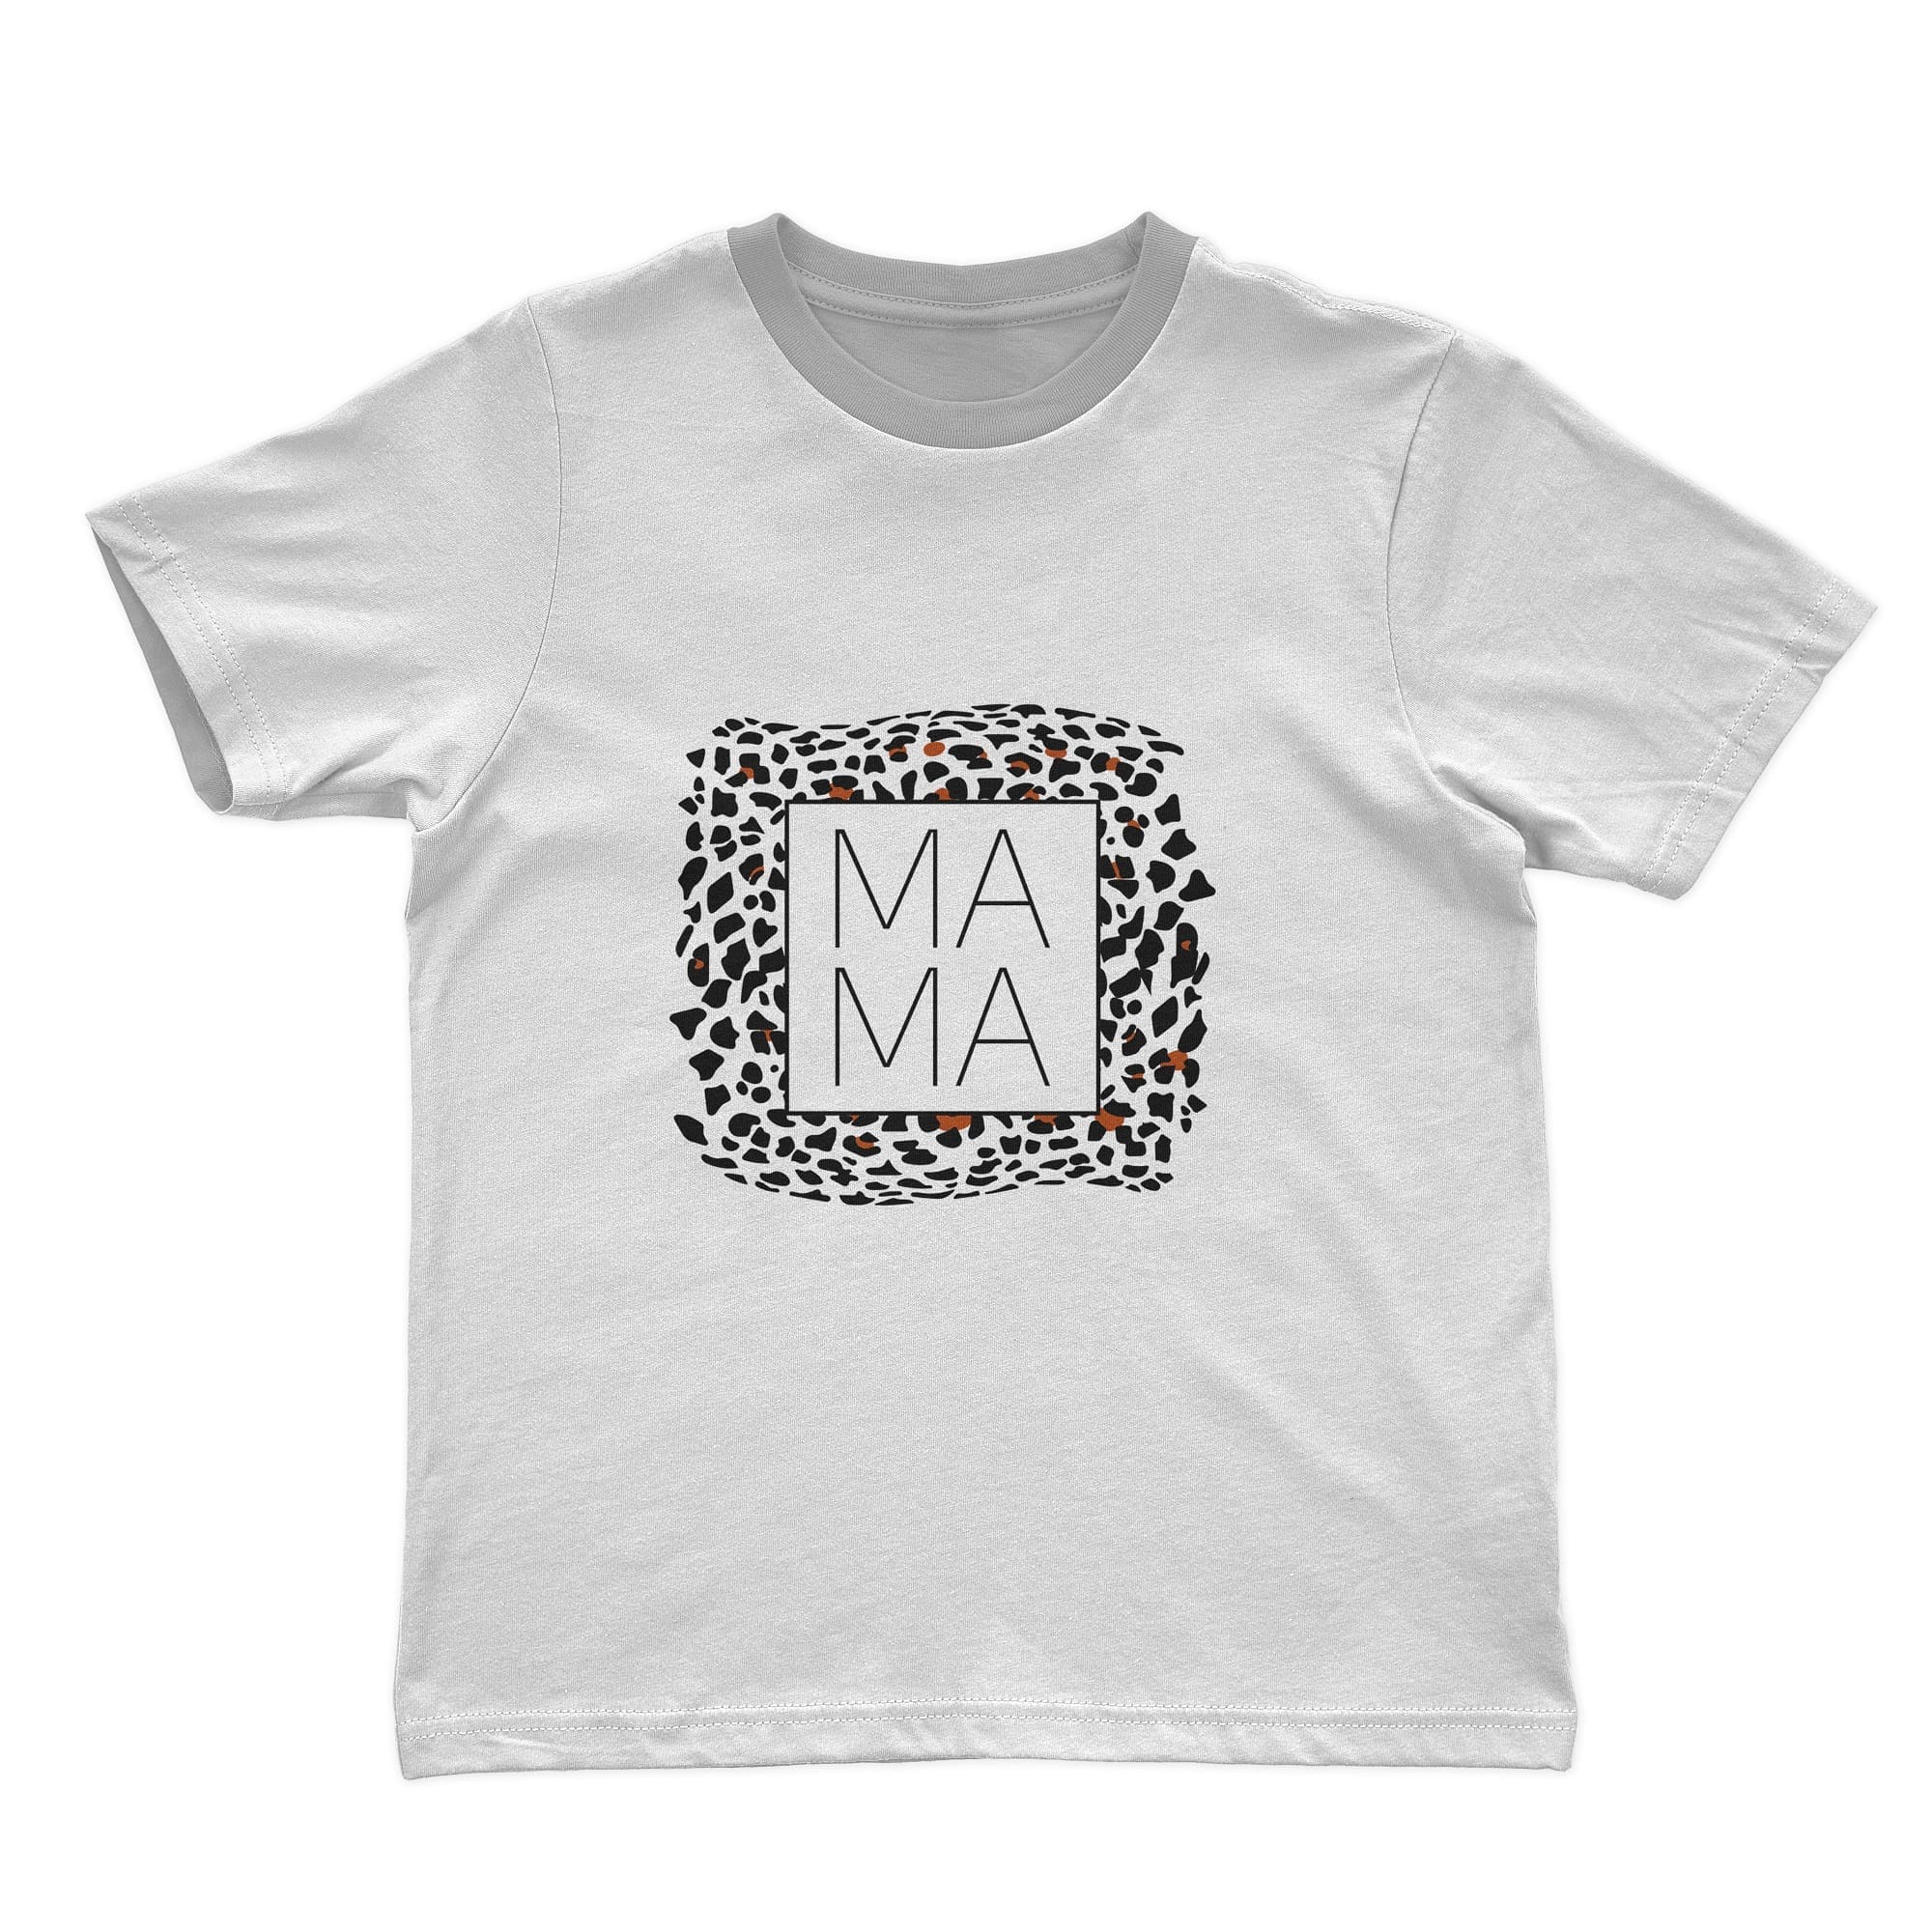 Square logo of a leopard mother on a white T-shirt.